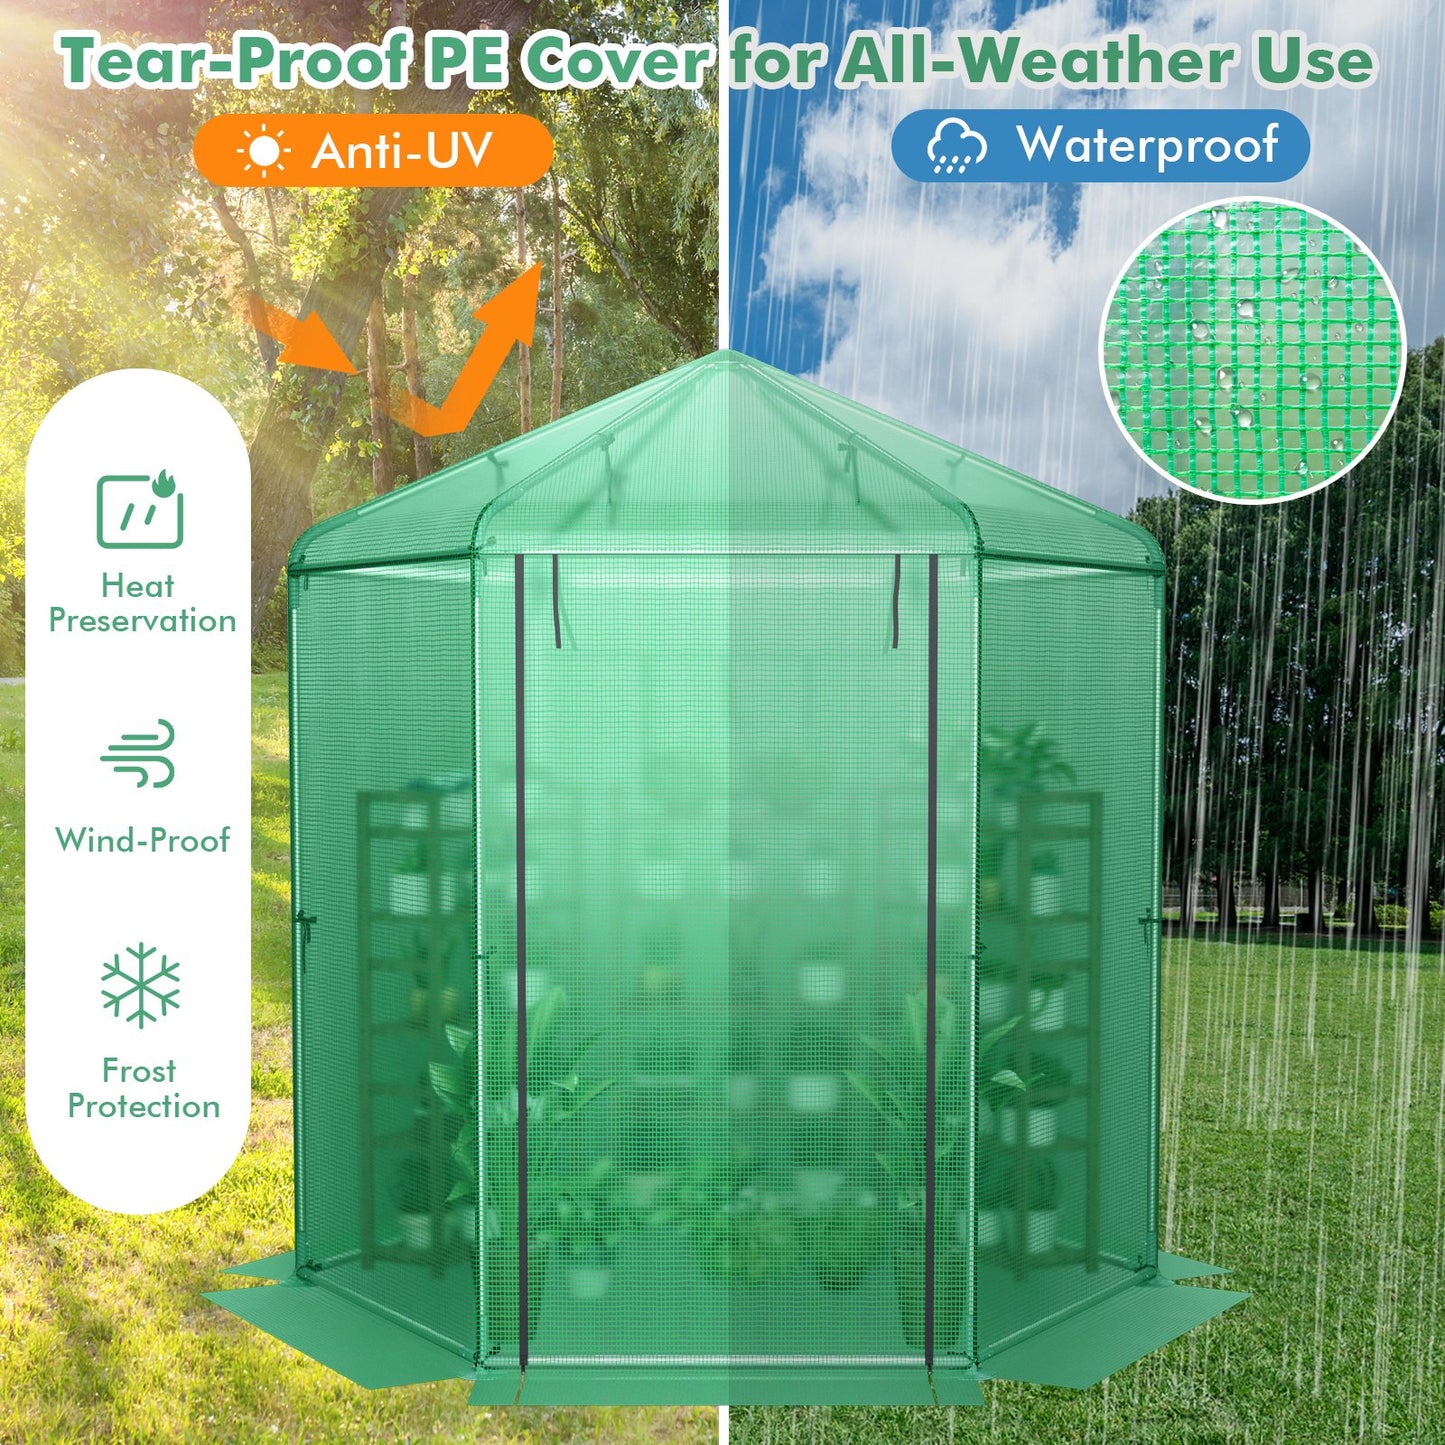 Walk-In Hexagonal Greenhouse with PE Cover and Metal Frame, Green